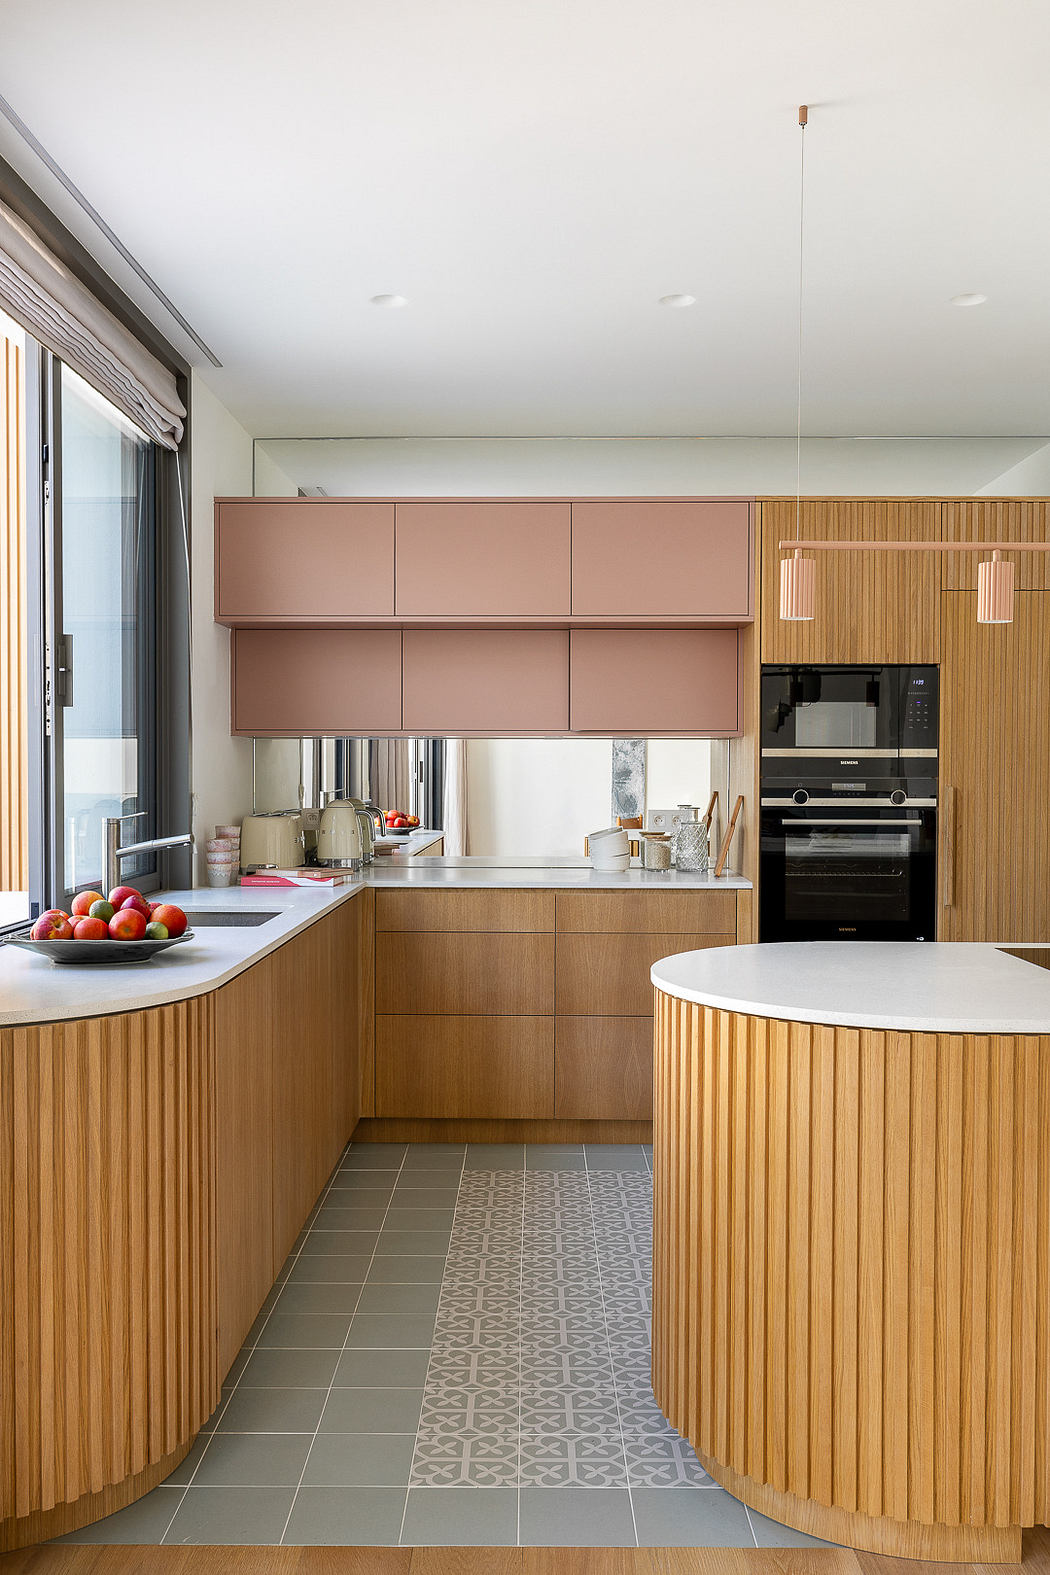 Modern kitchen with curved wooden cabinets and pink upper units.